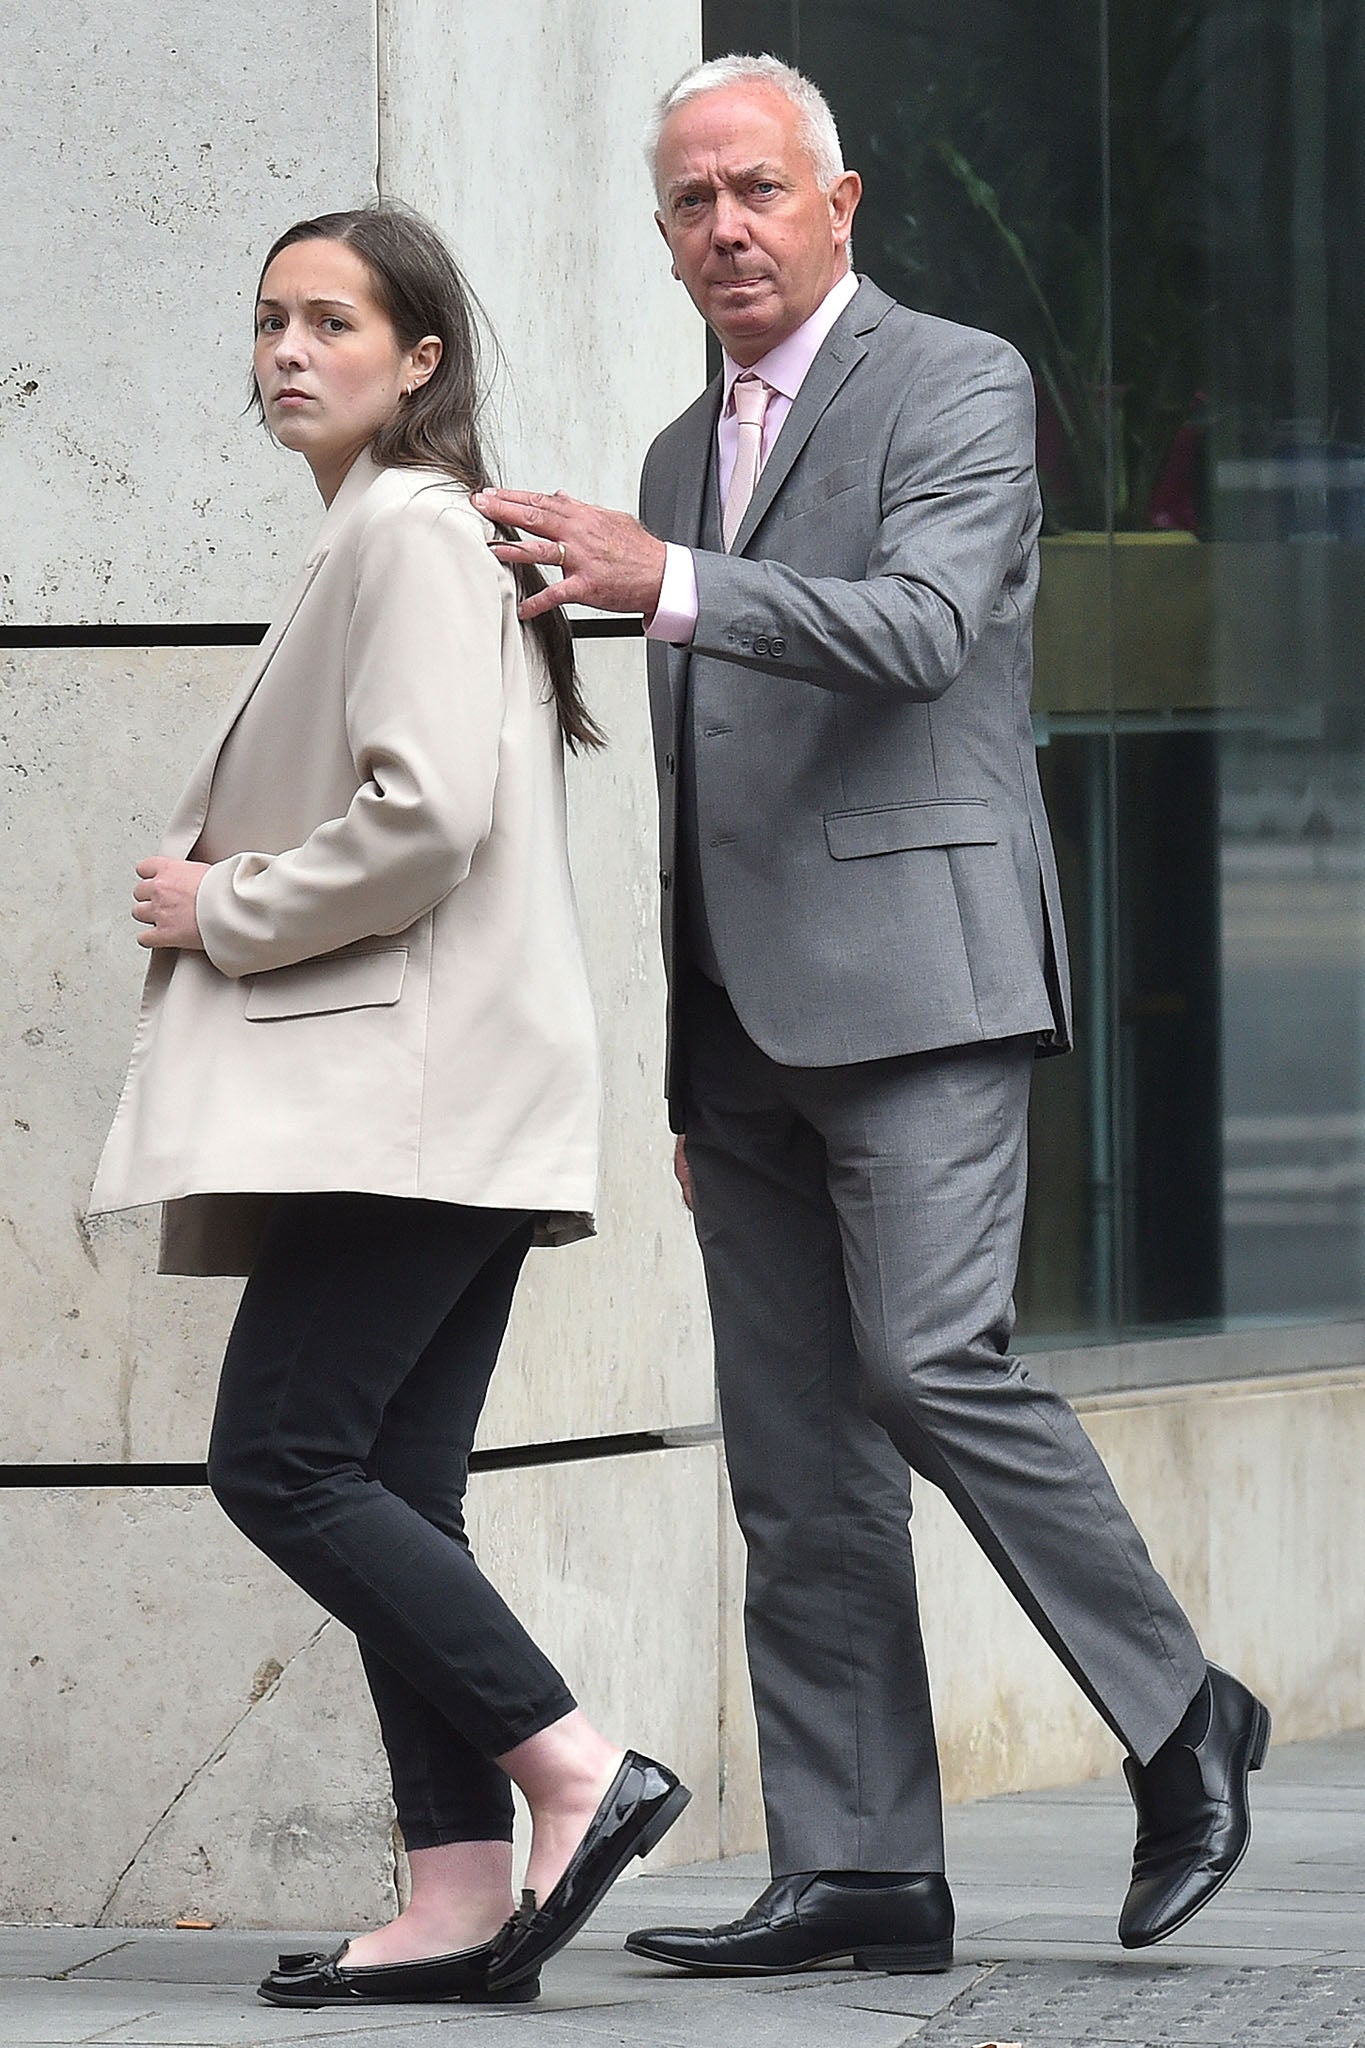 Joynes leaves Manchester Crown Court with her father after first hearing